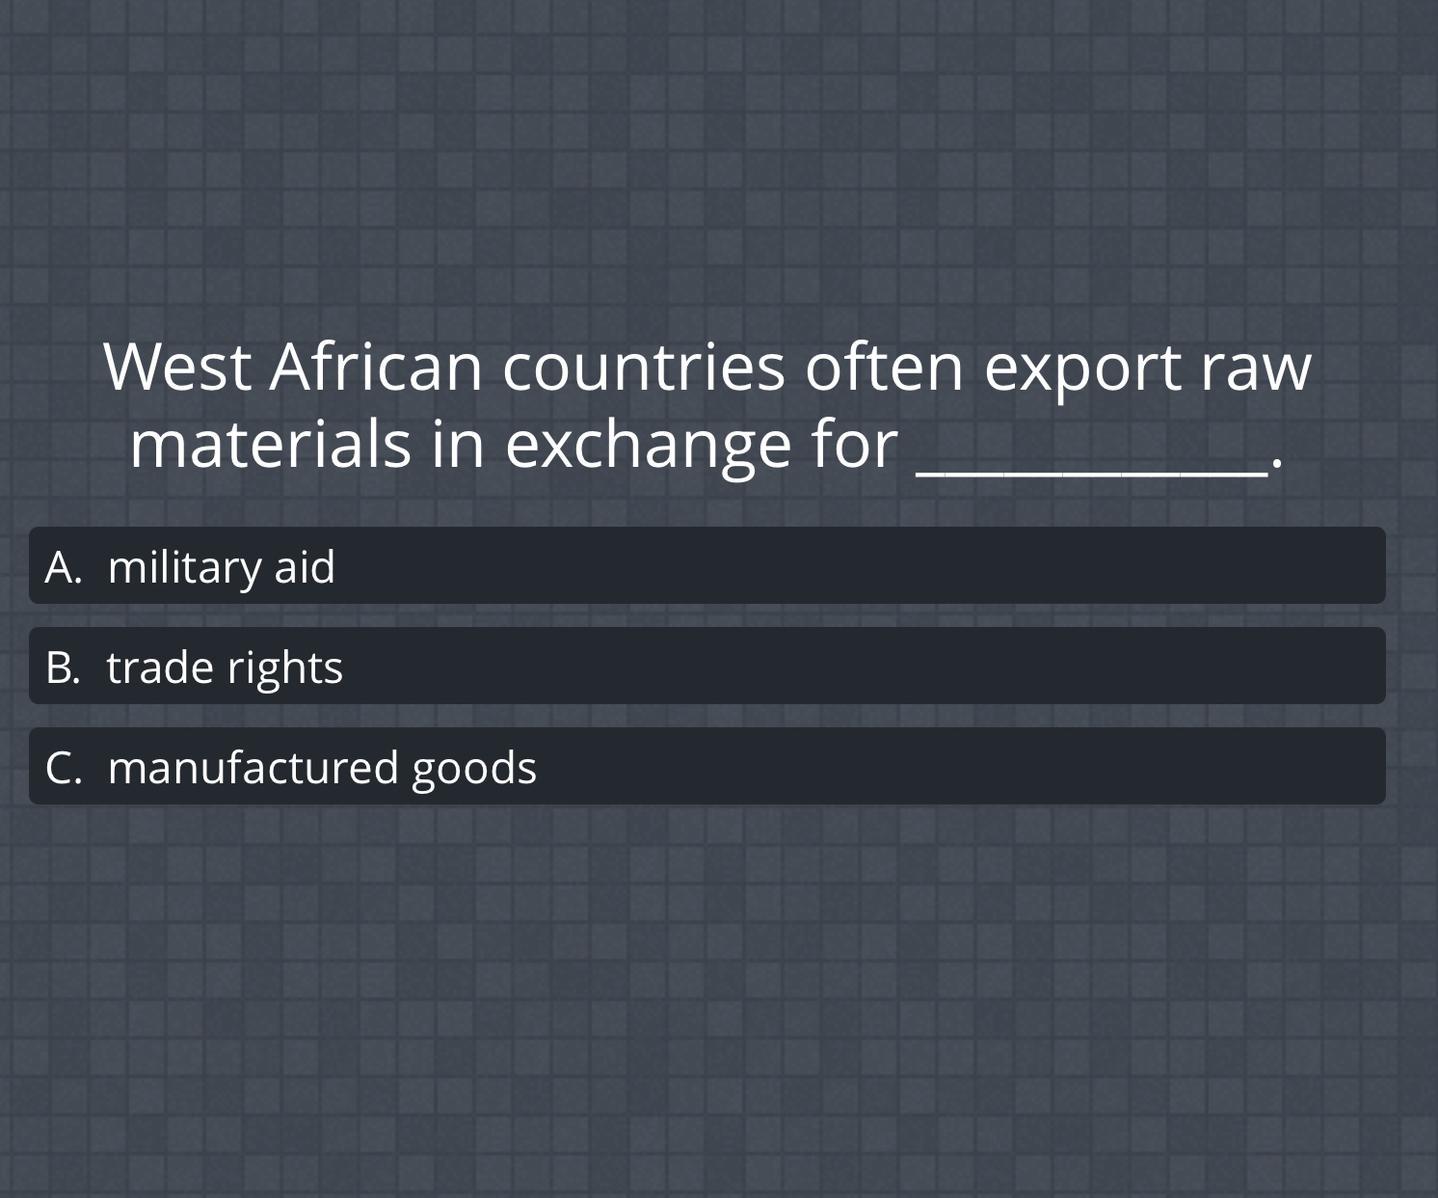 West African Countries Often Export Rawmaterials In Exchange ForA. Military AidB. Trade RightsC. Manufactured